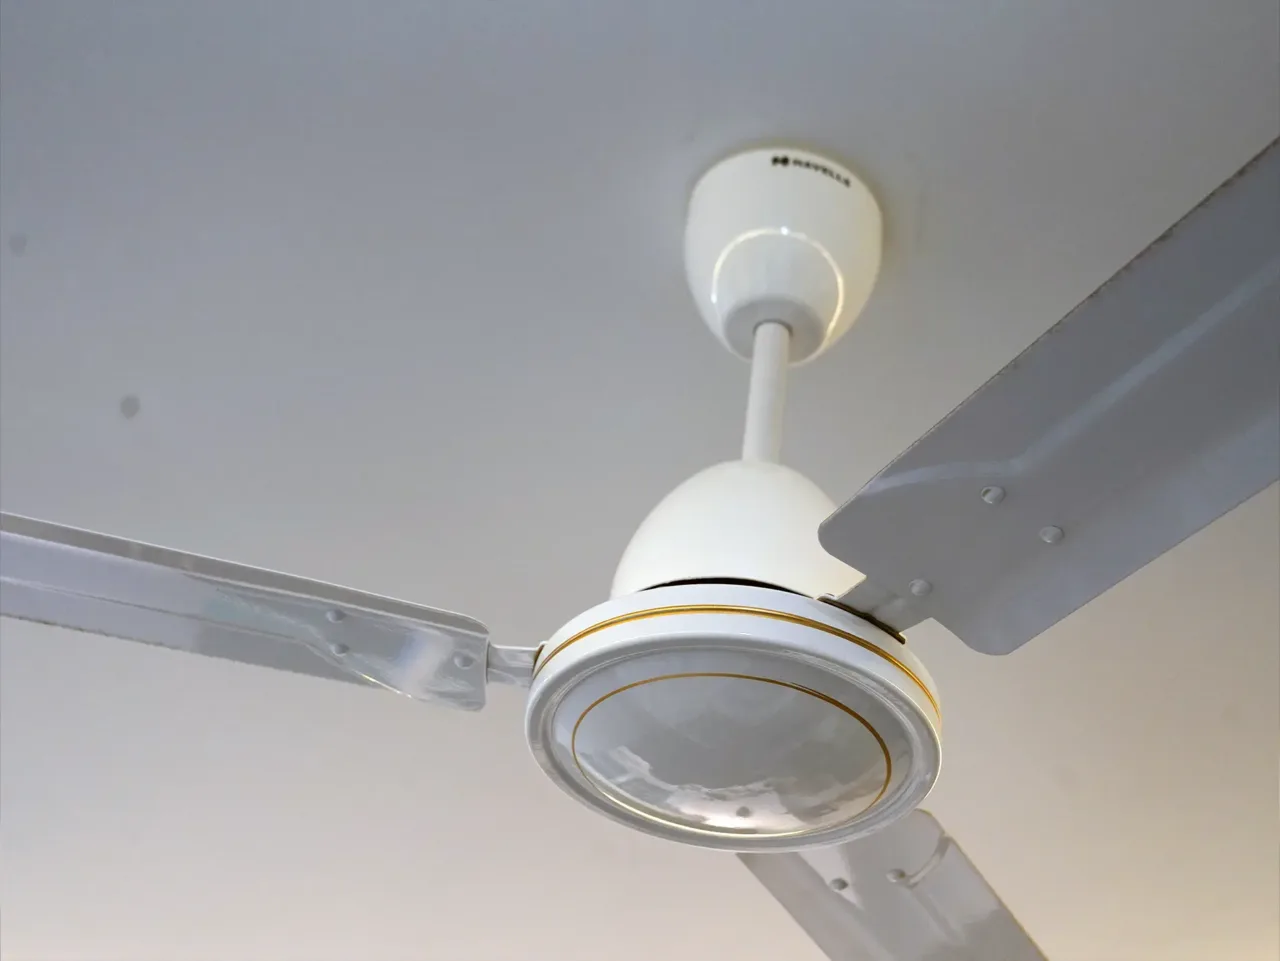 Havells BLDC fan review